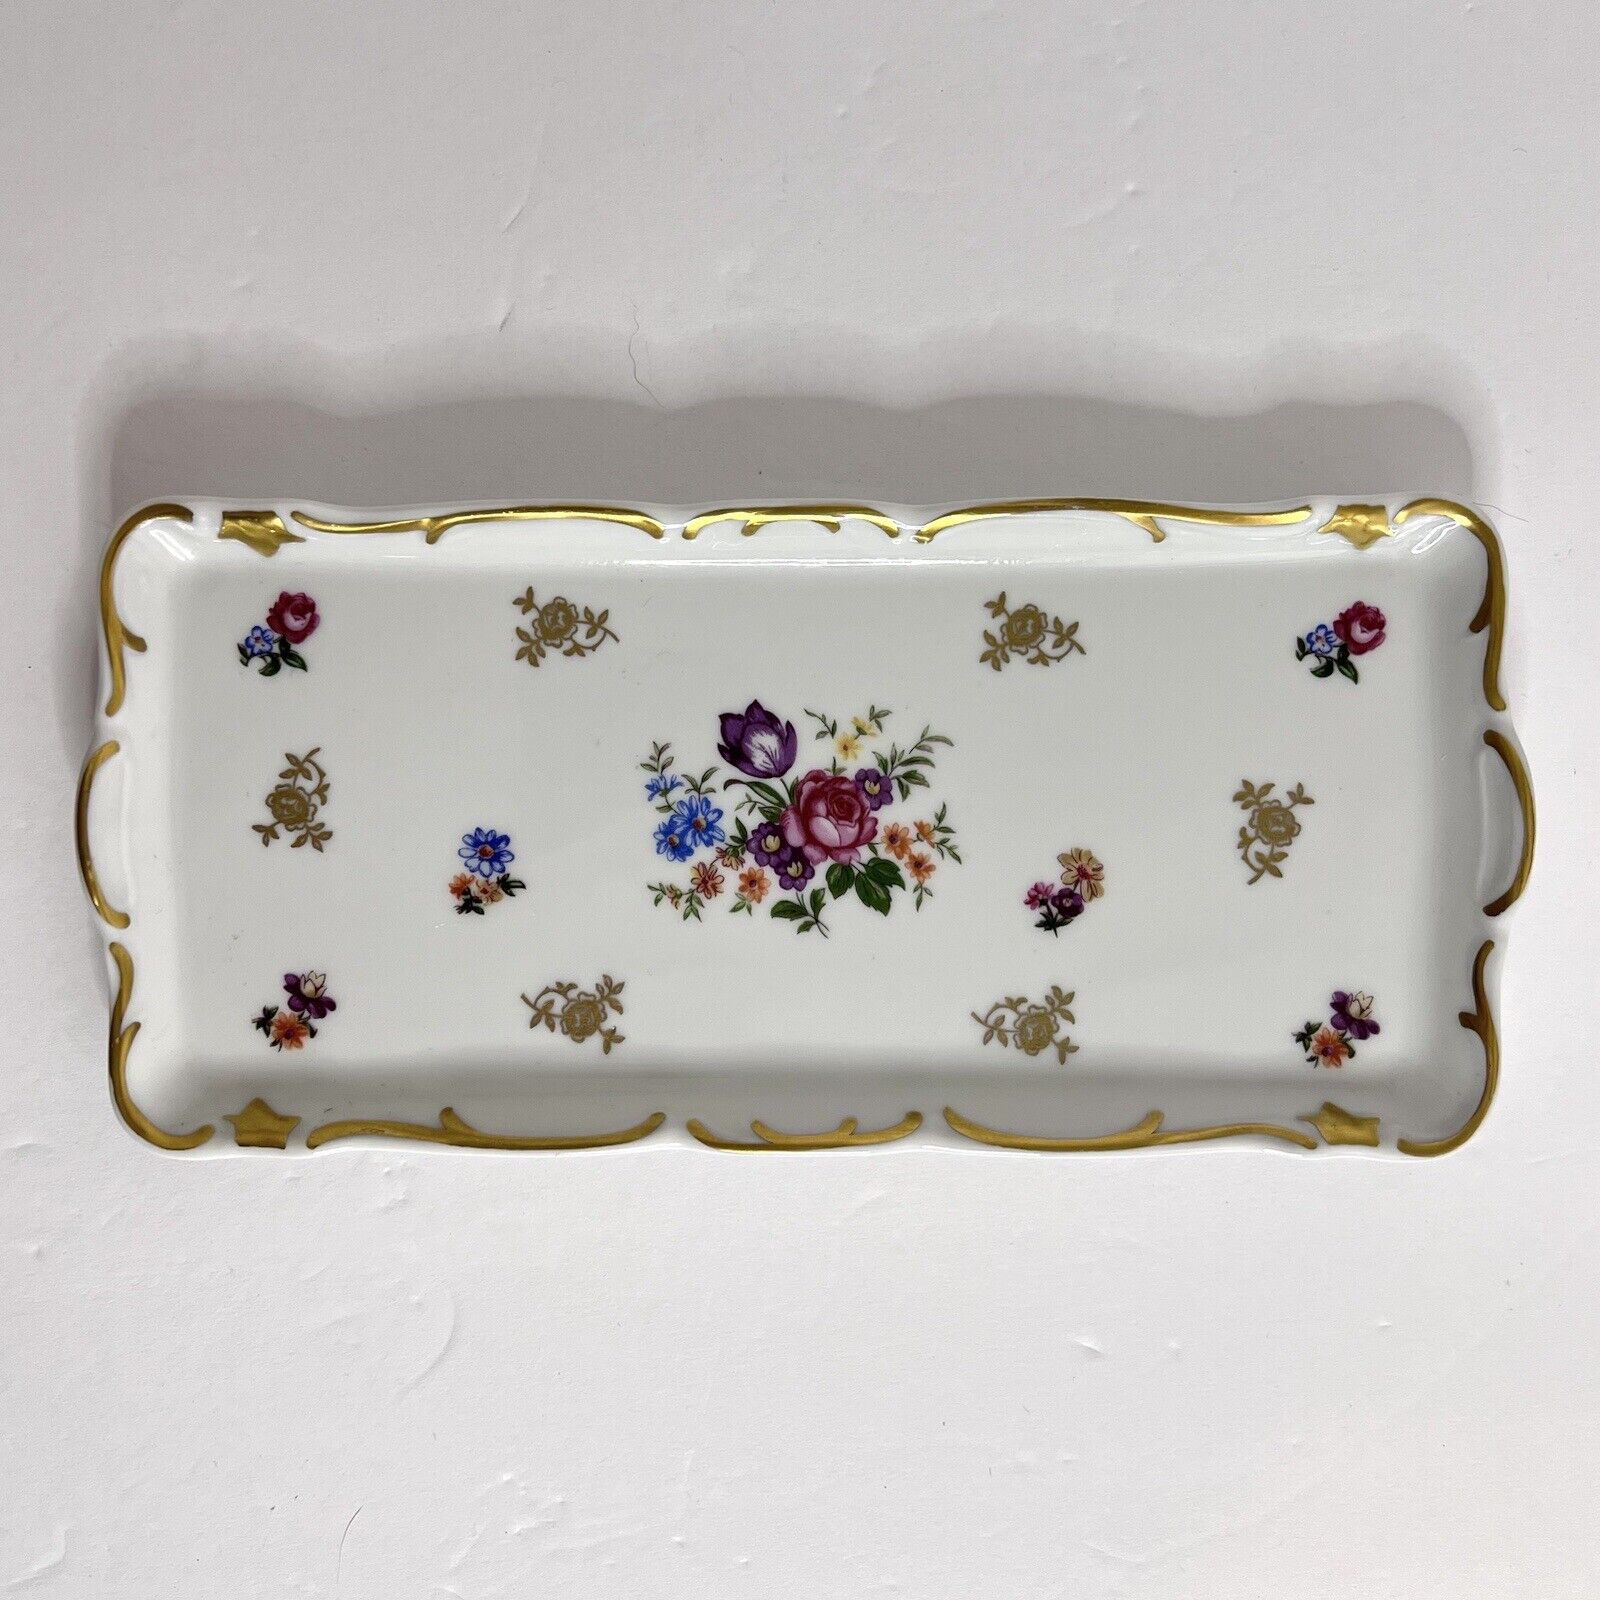 VTG Reichenbach Rectangle Bone China Tray Made in the GDR East Germany Floral